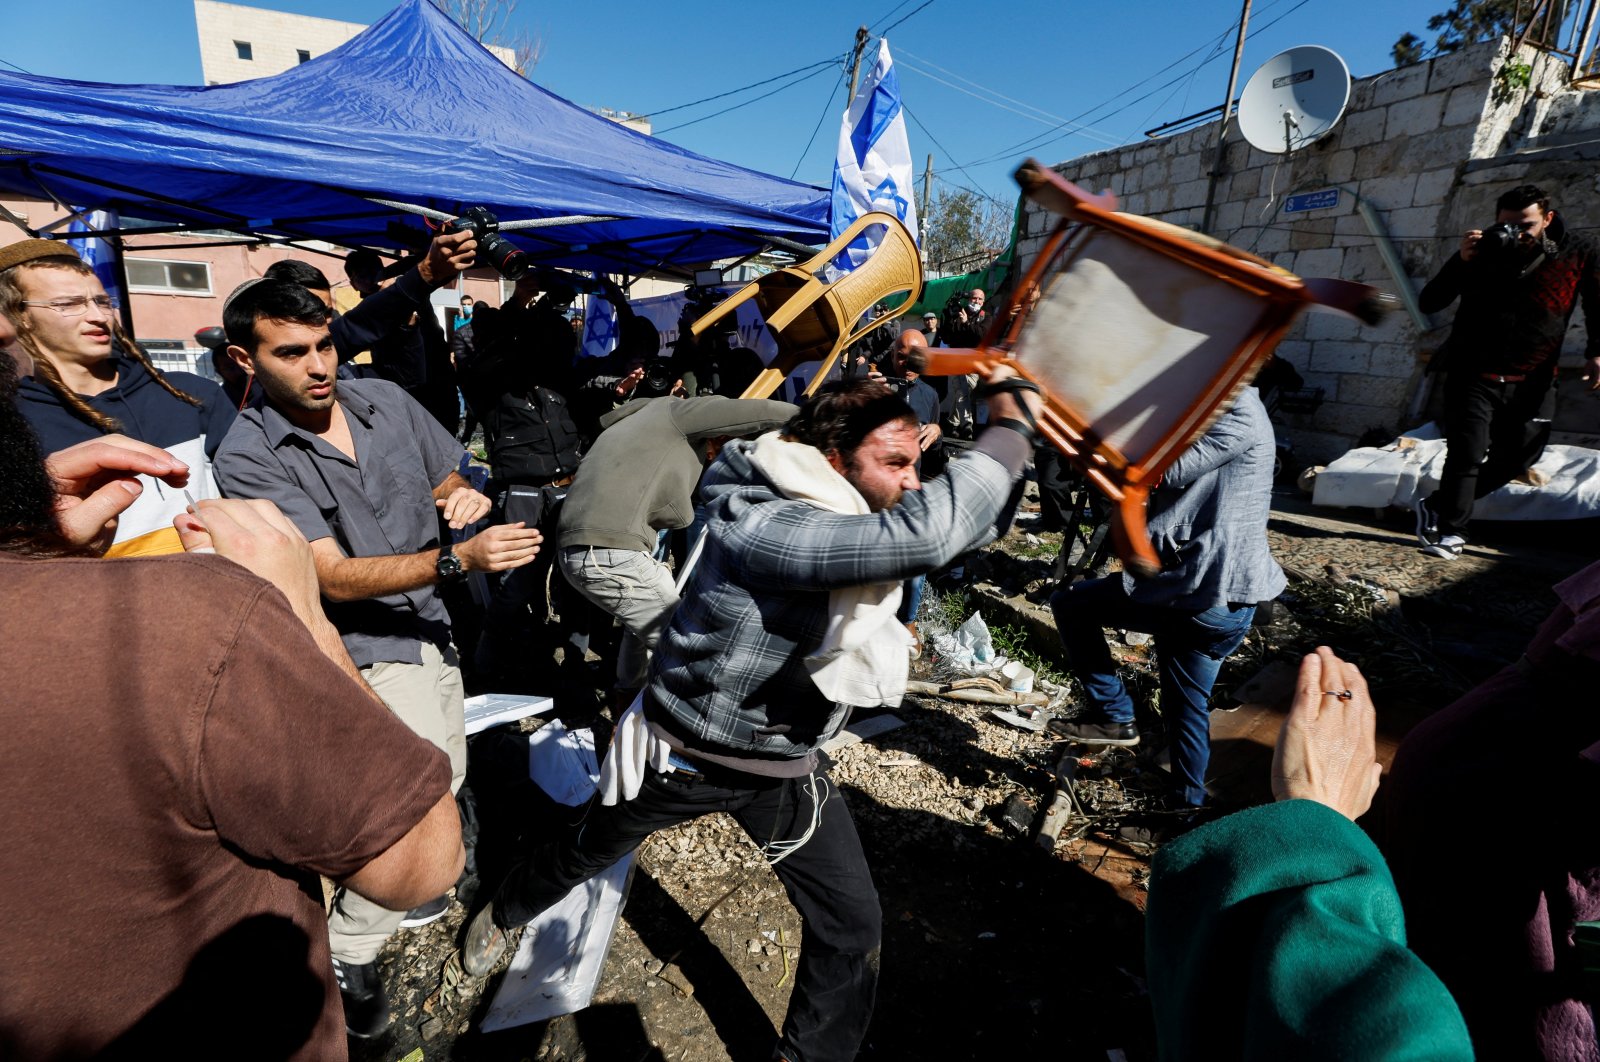 Jewish settlers hurling chairs at Palestinian protesters (not shown) in Sheikh Jarrah, East Jerusalem, occupied Palestine, Feb. 13, 2022. (Reuters Photo)